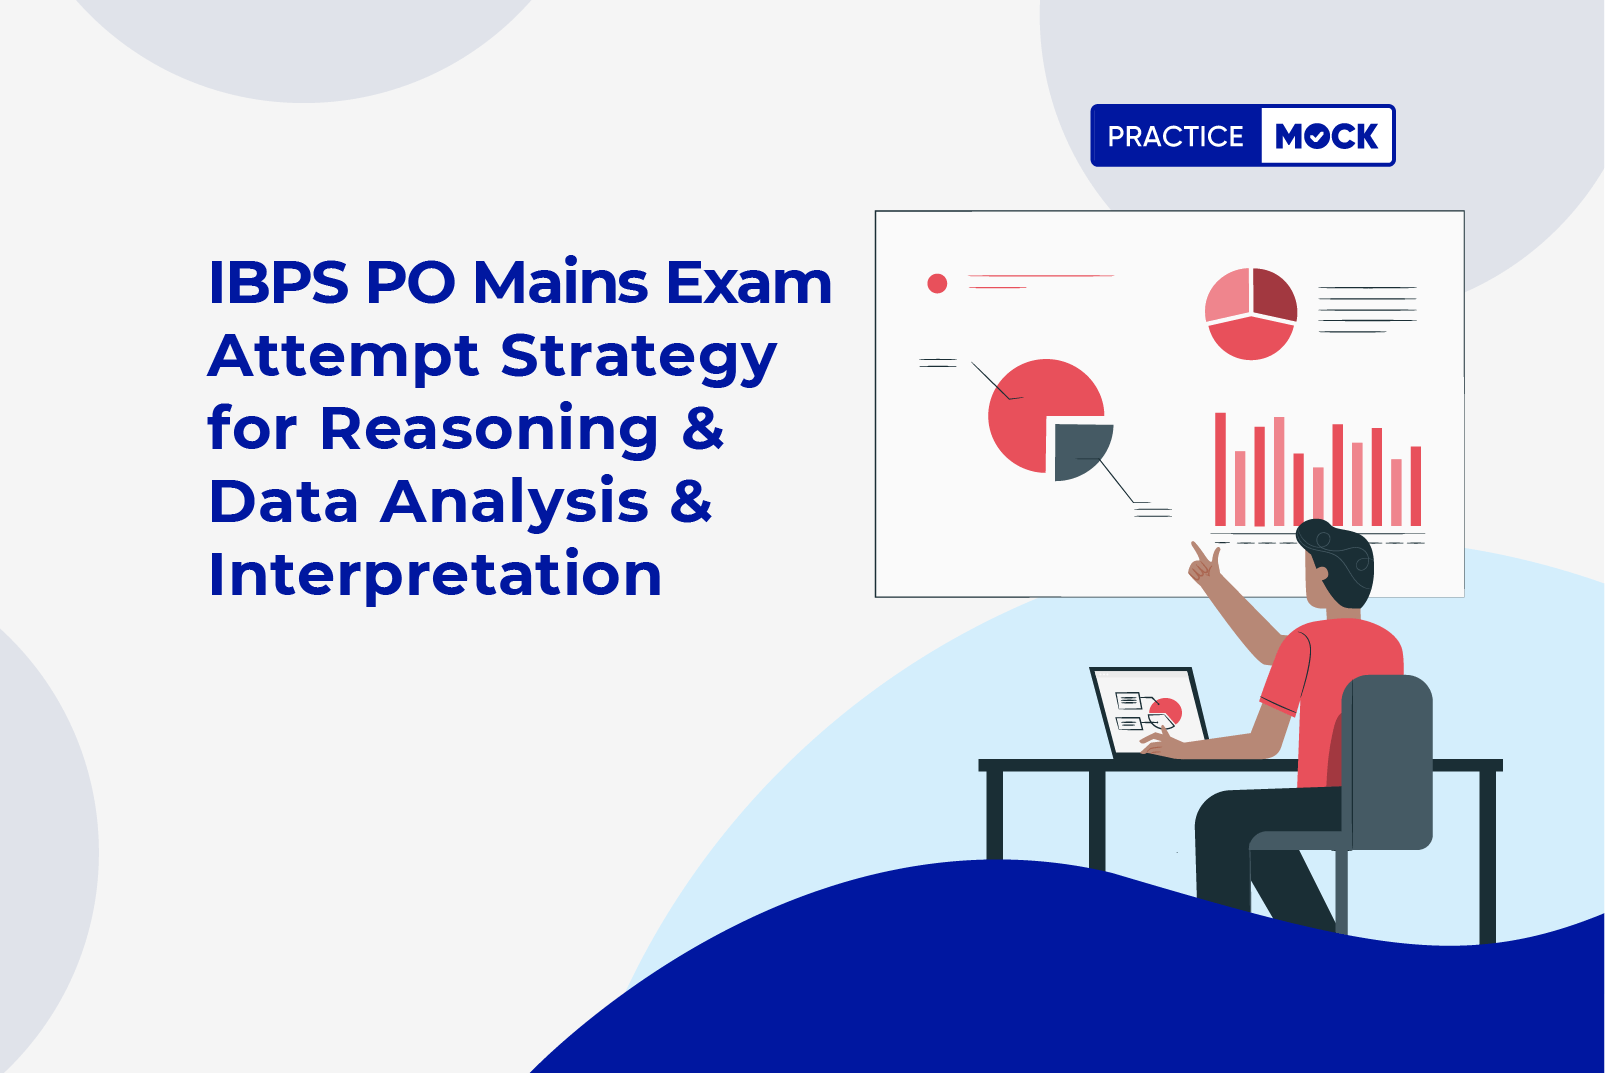 IBPS PO Mains Exam Attempt Strategy